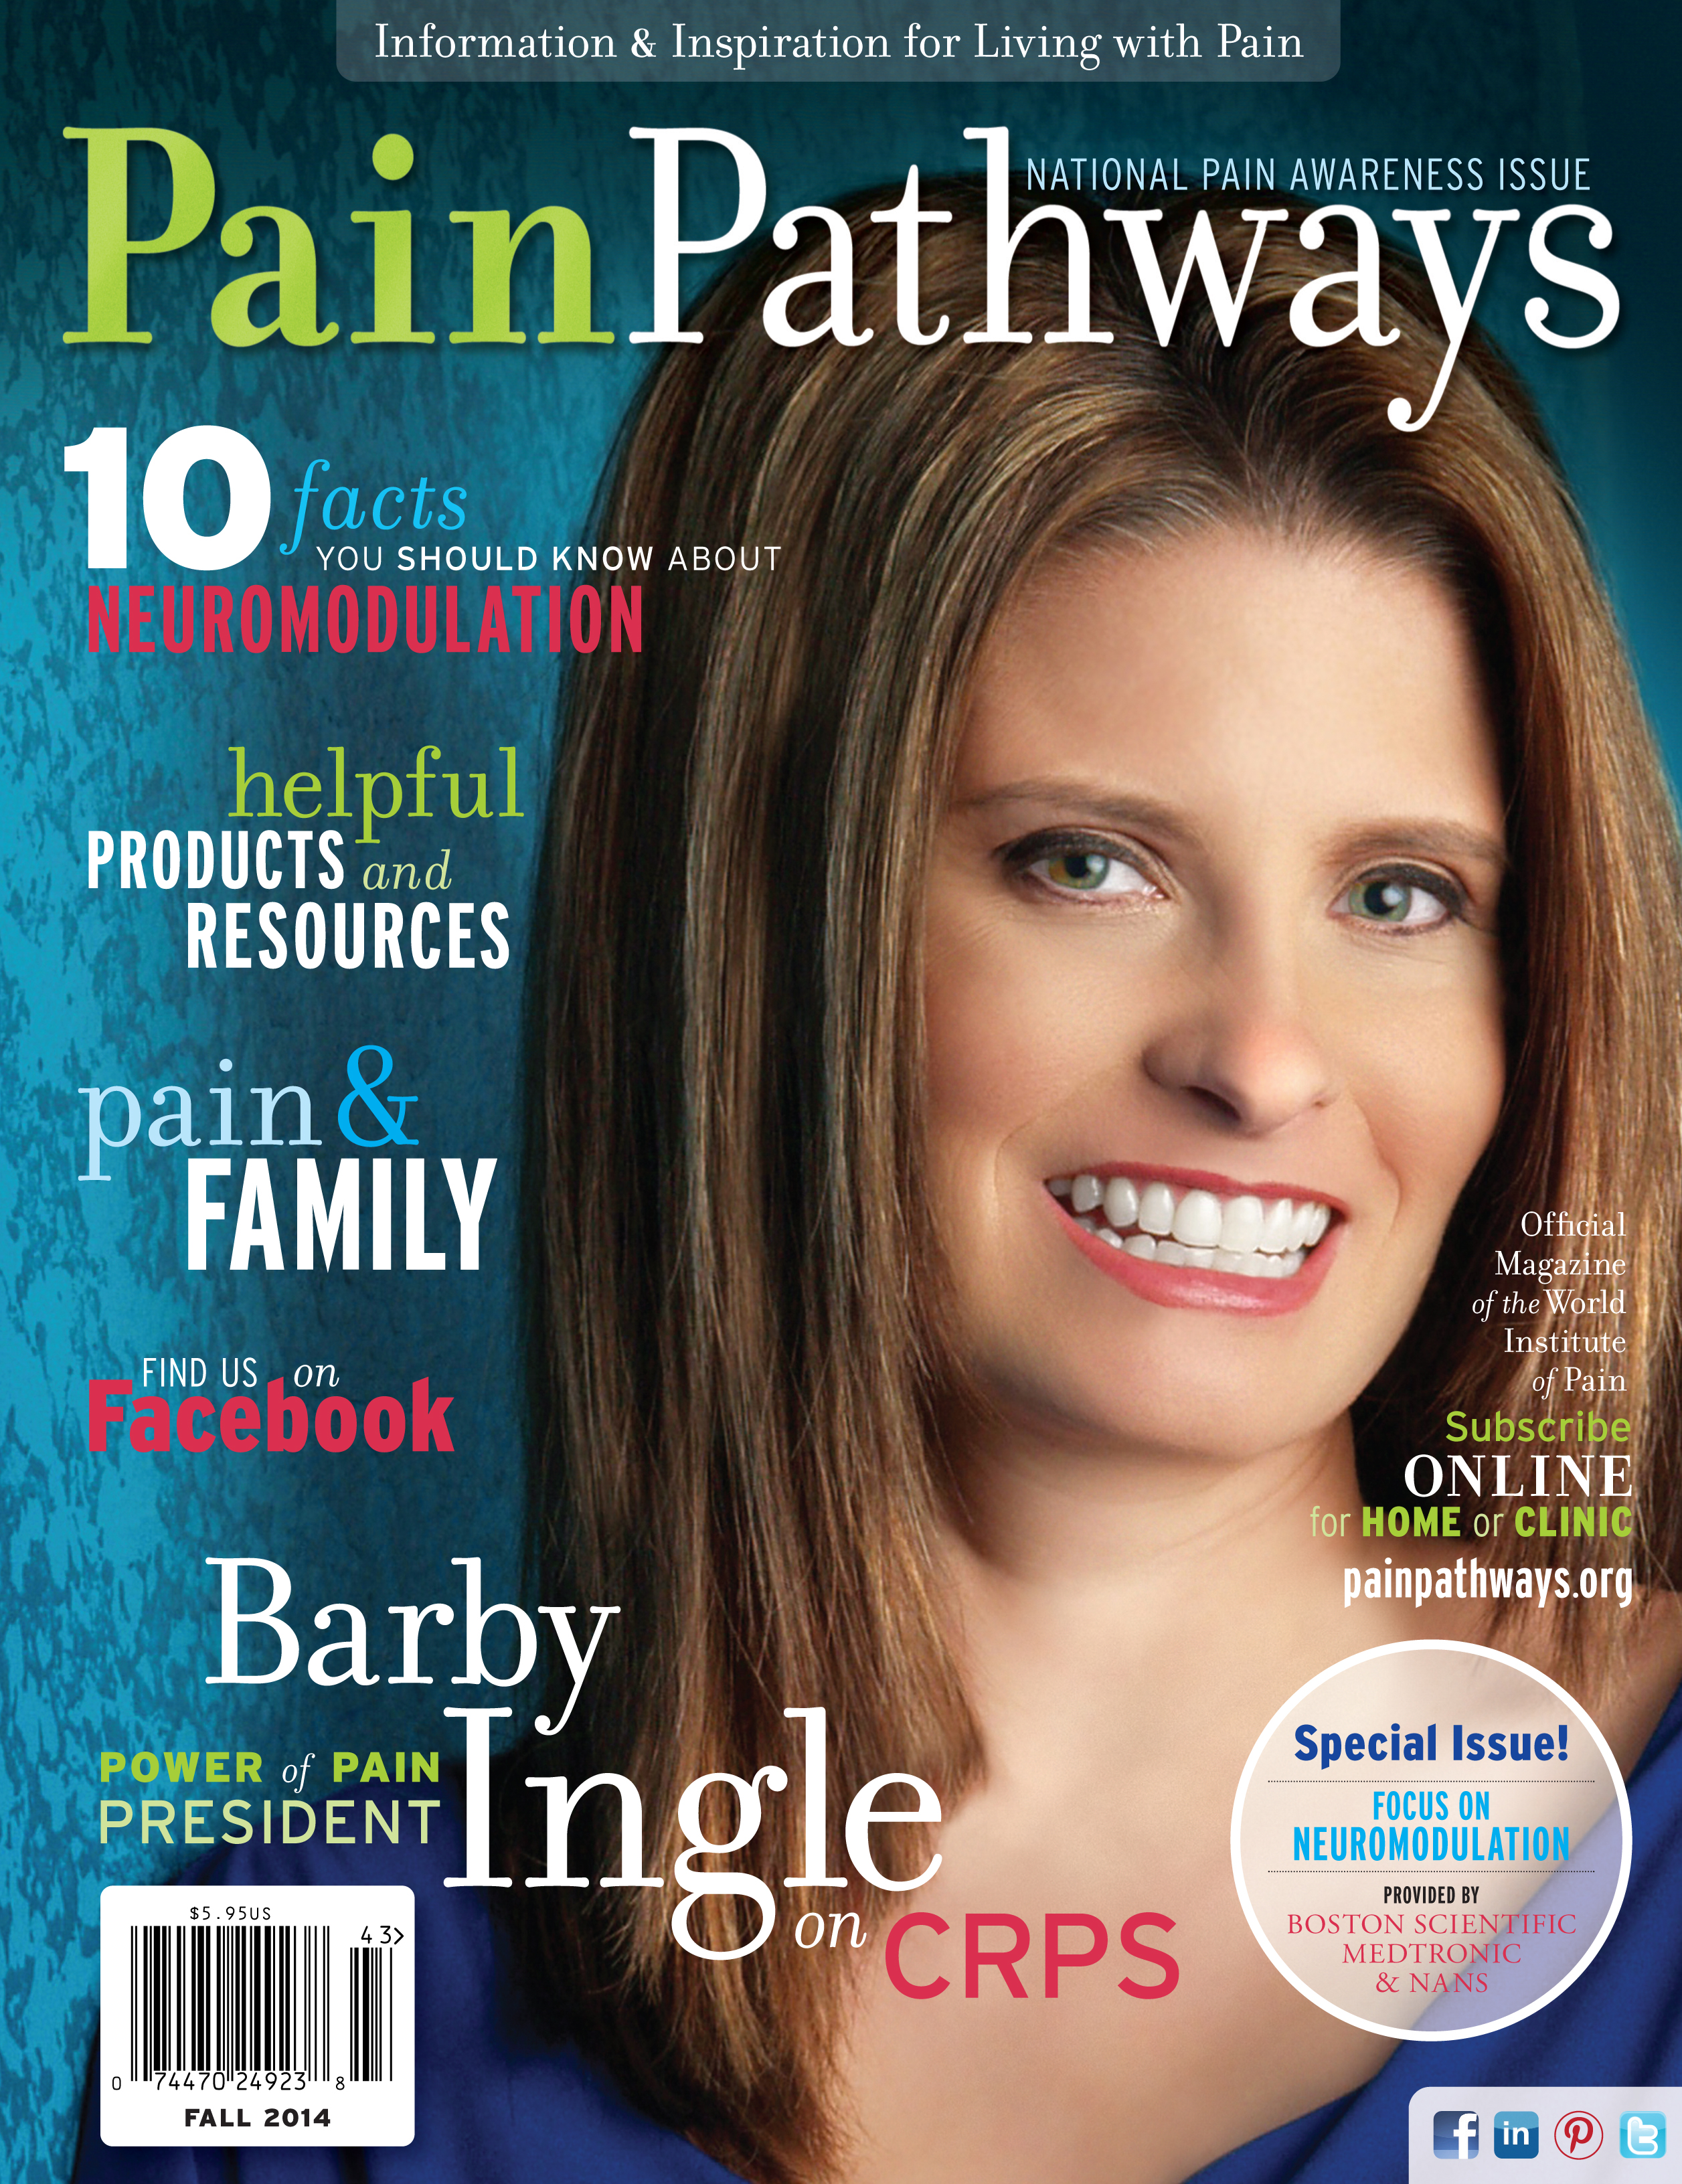 Barby Ingle - Celebrity Cover Story for FALL 2014 Pain Pathways Magazine